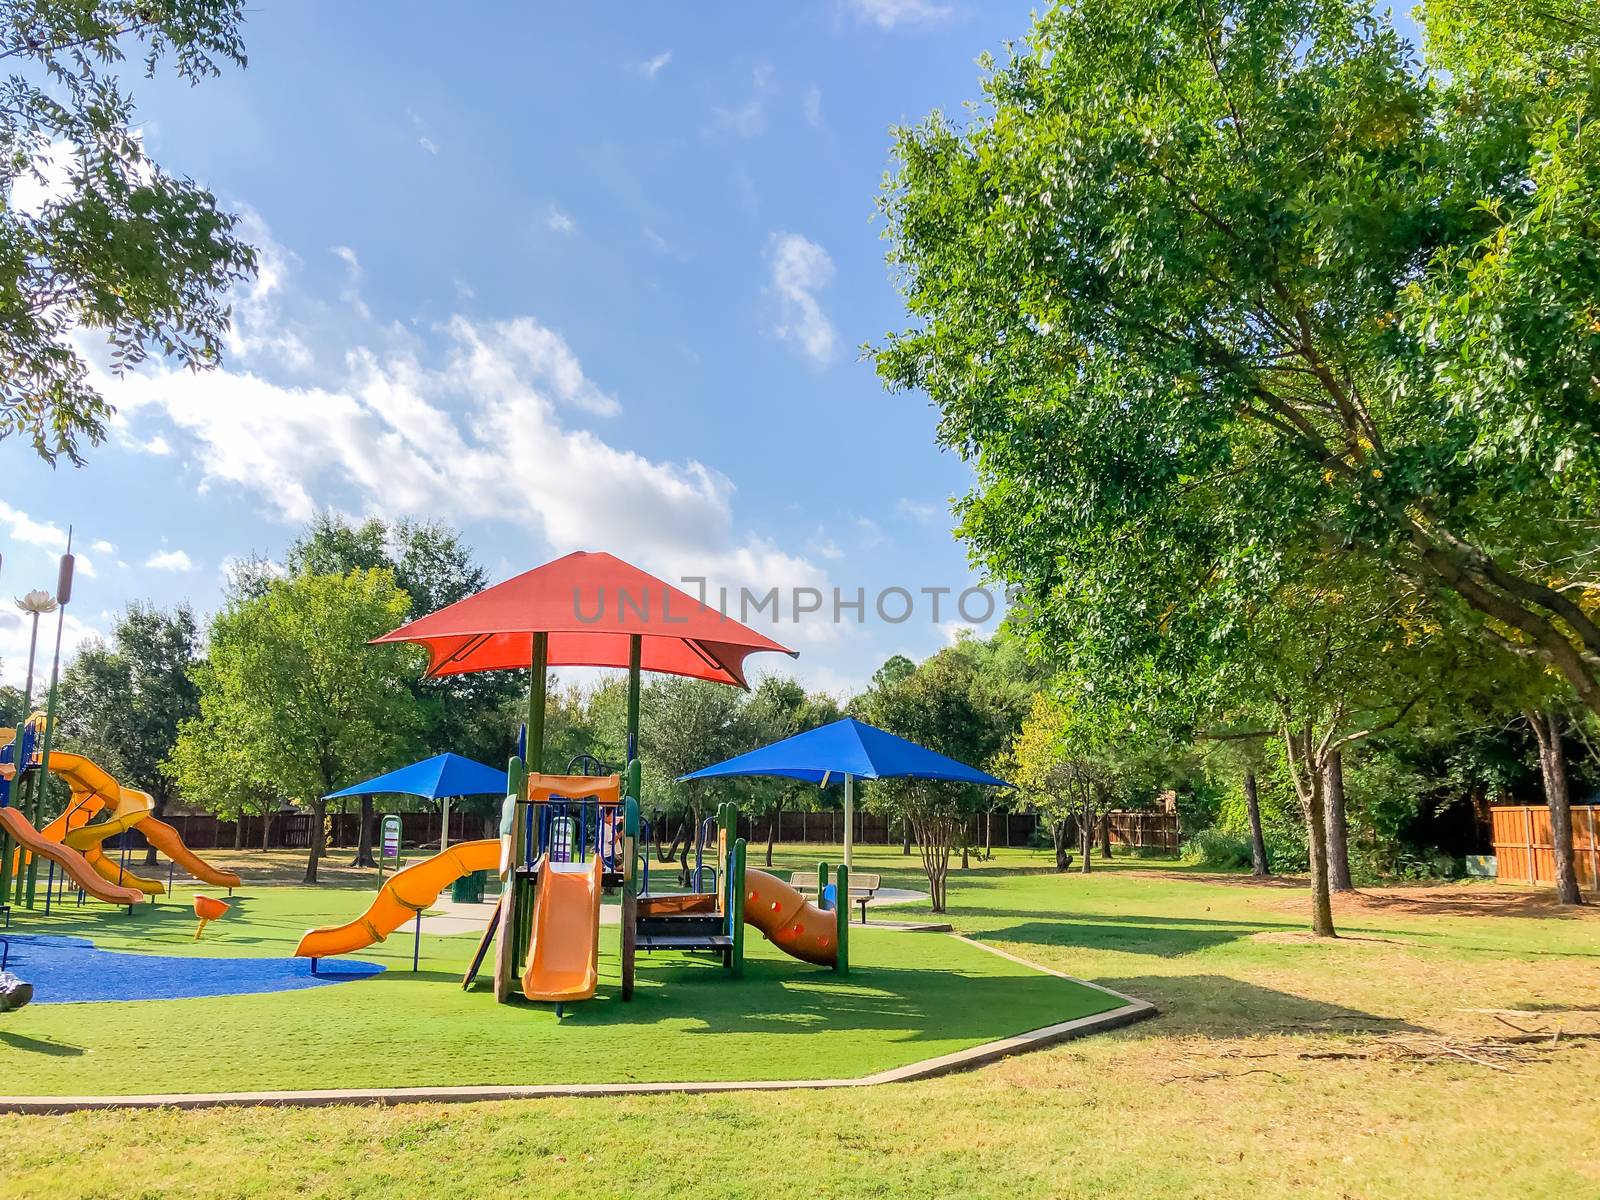 Residential area playground with sun shade sails and artificial grass in Flower Mound, Texas, USA by trongnguyen